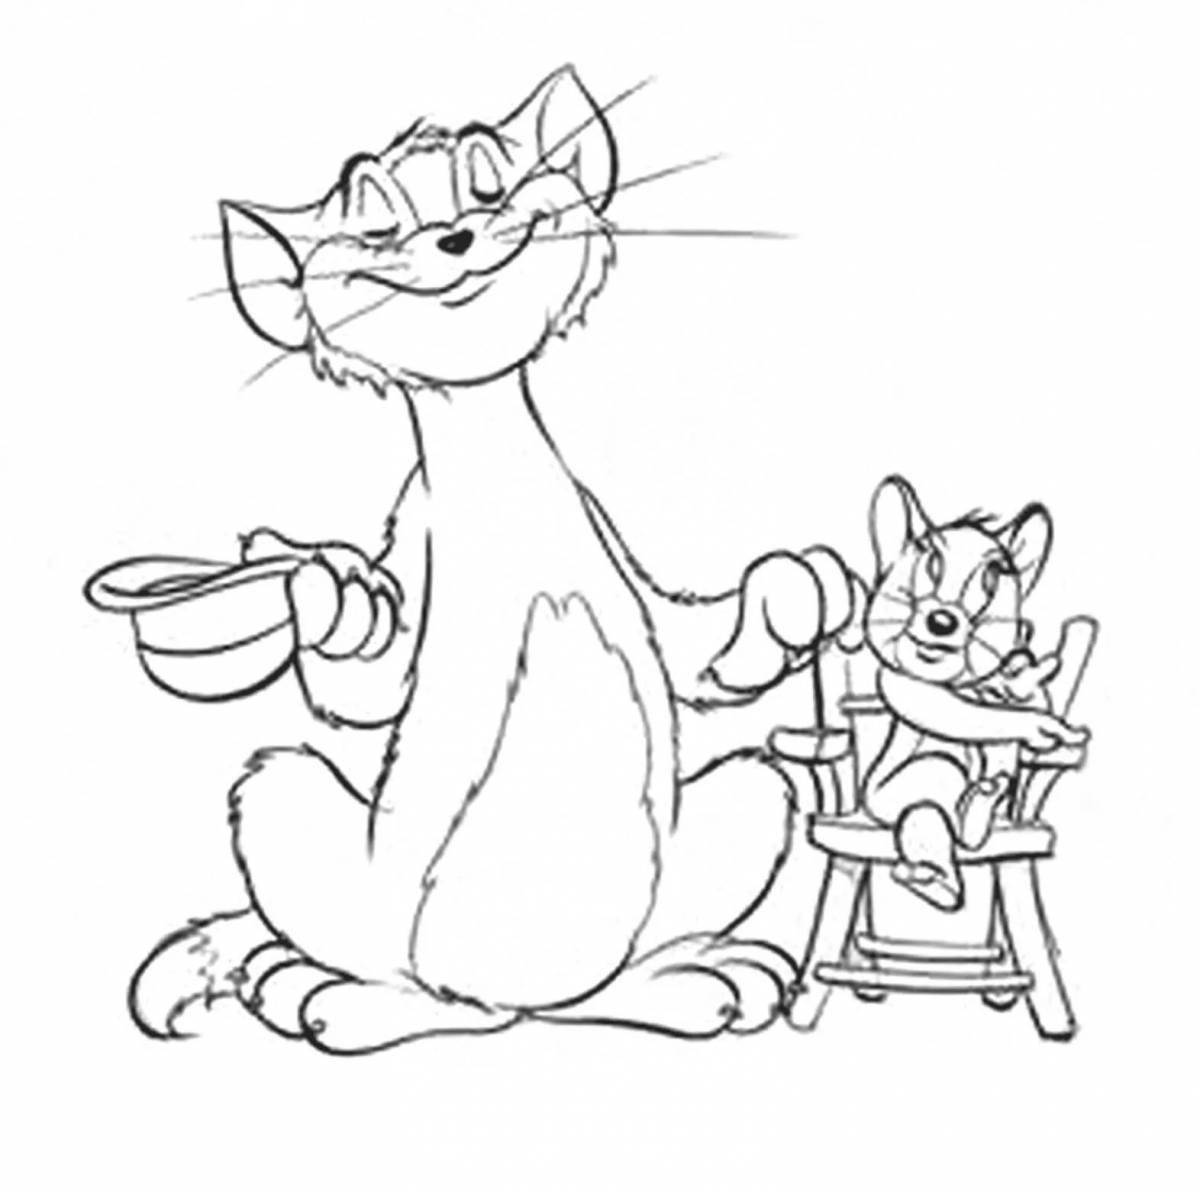 Snuggly cat tom coloring page